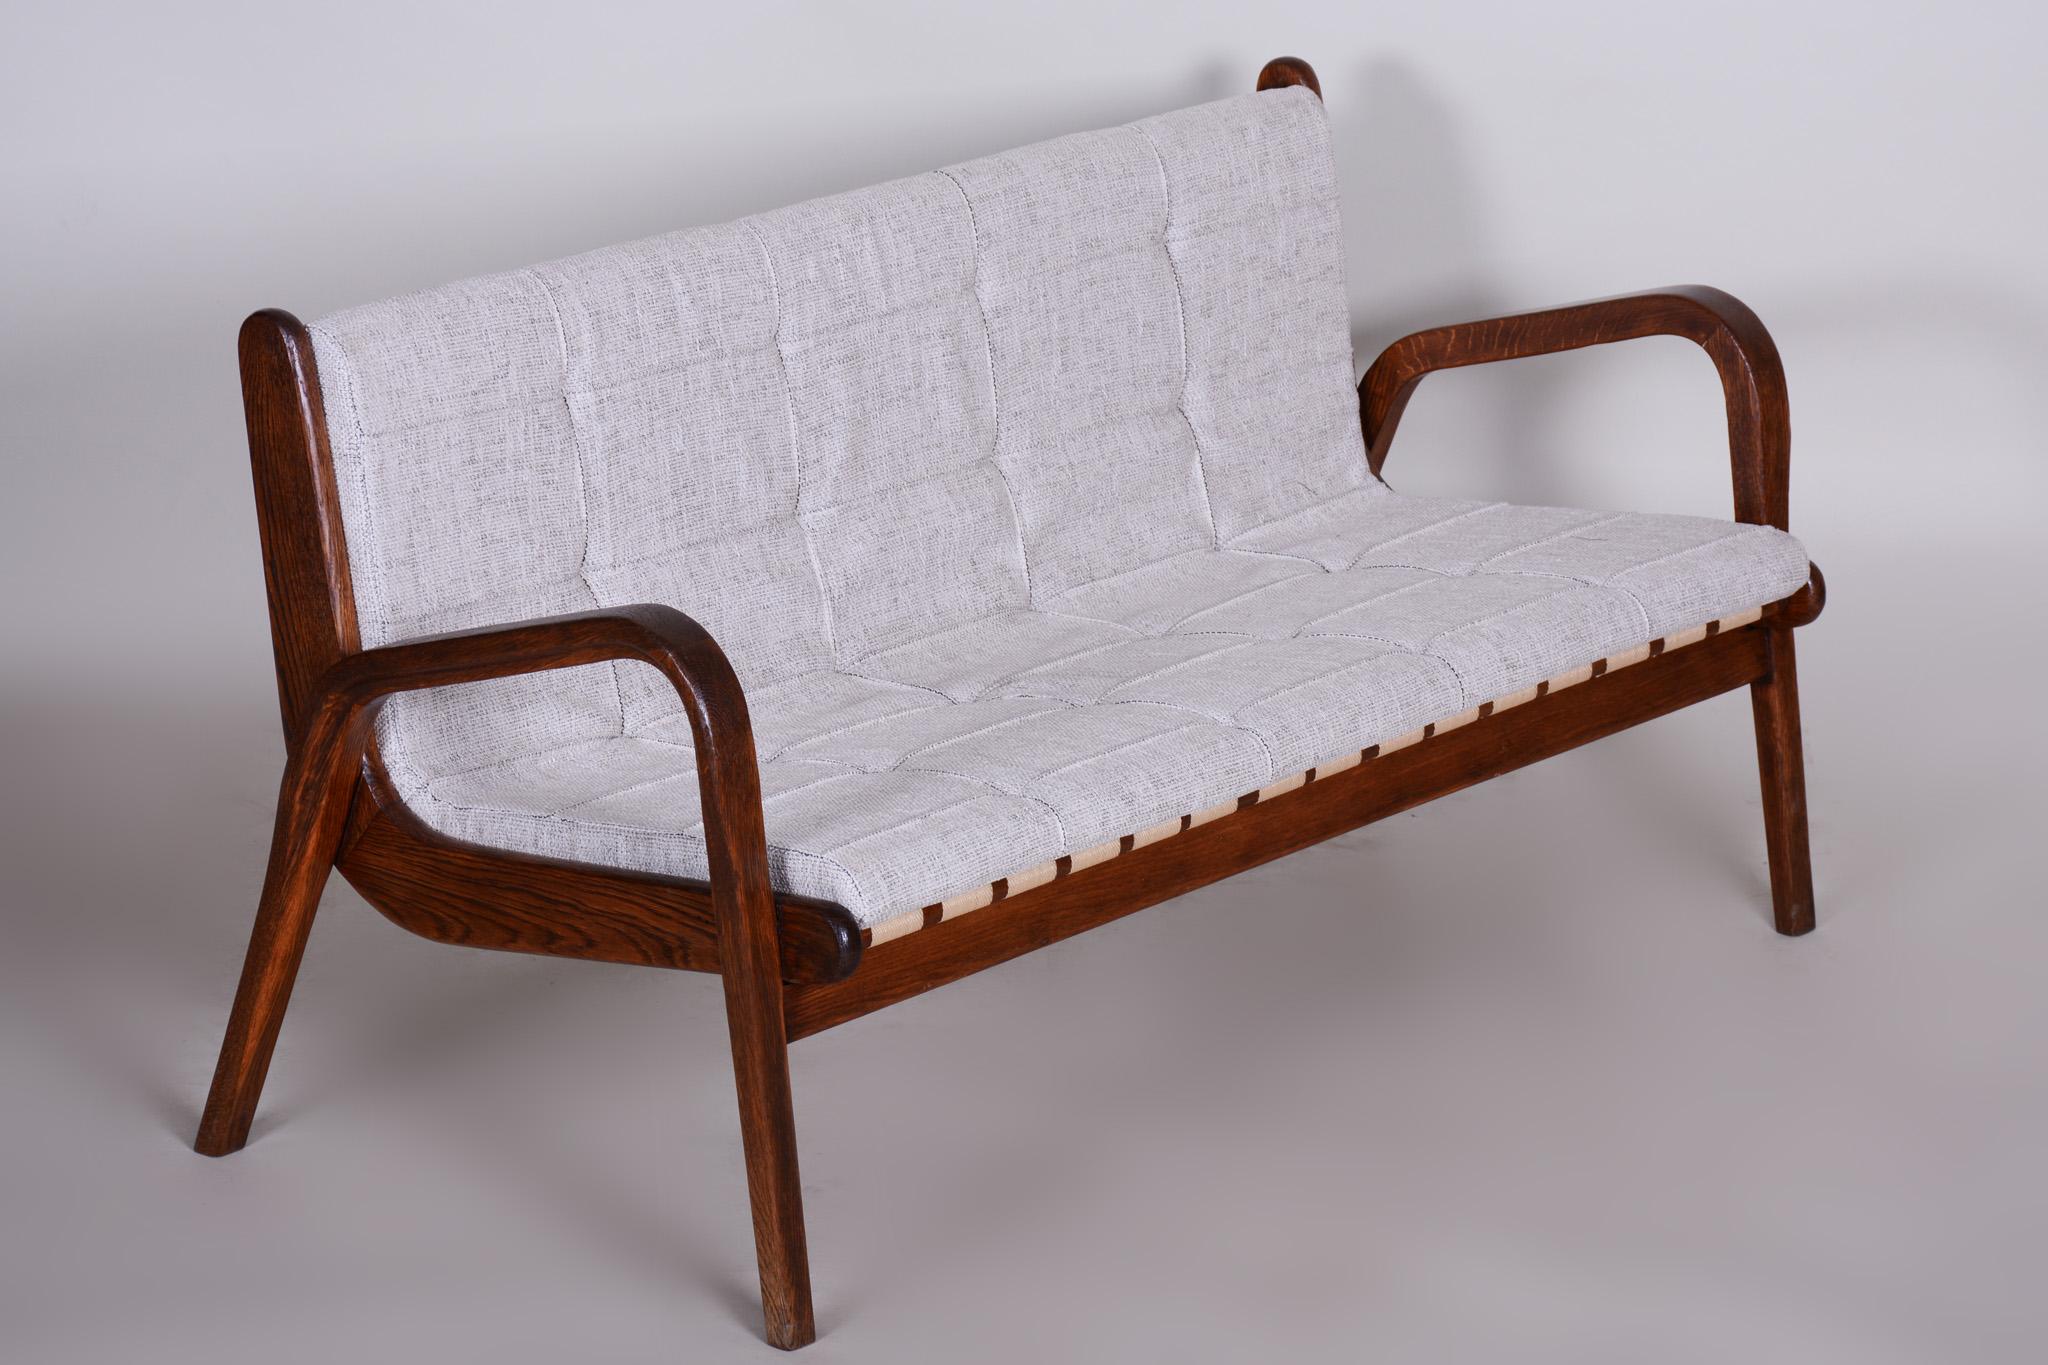 Czech Midcentury Brown Beech Sofa by Jan Vanek, New Upholstery, 1950s In Good Condition For Sale In Horomerice, CZ